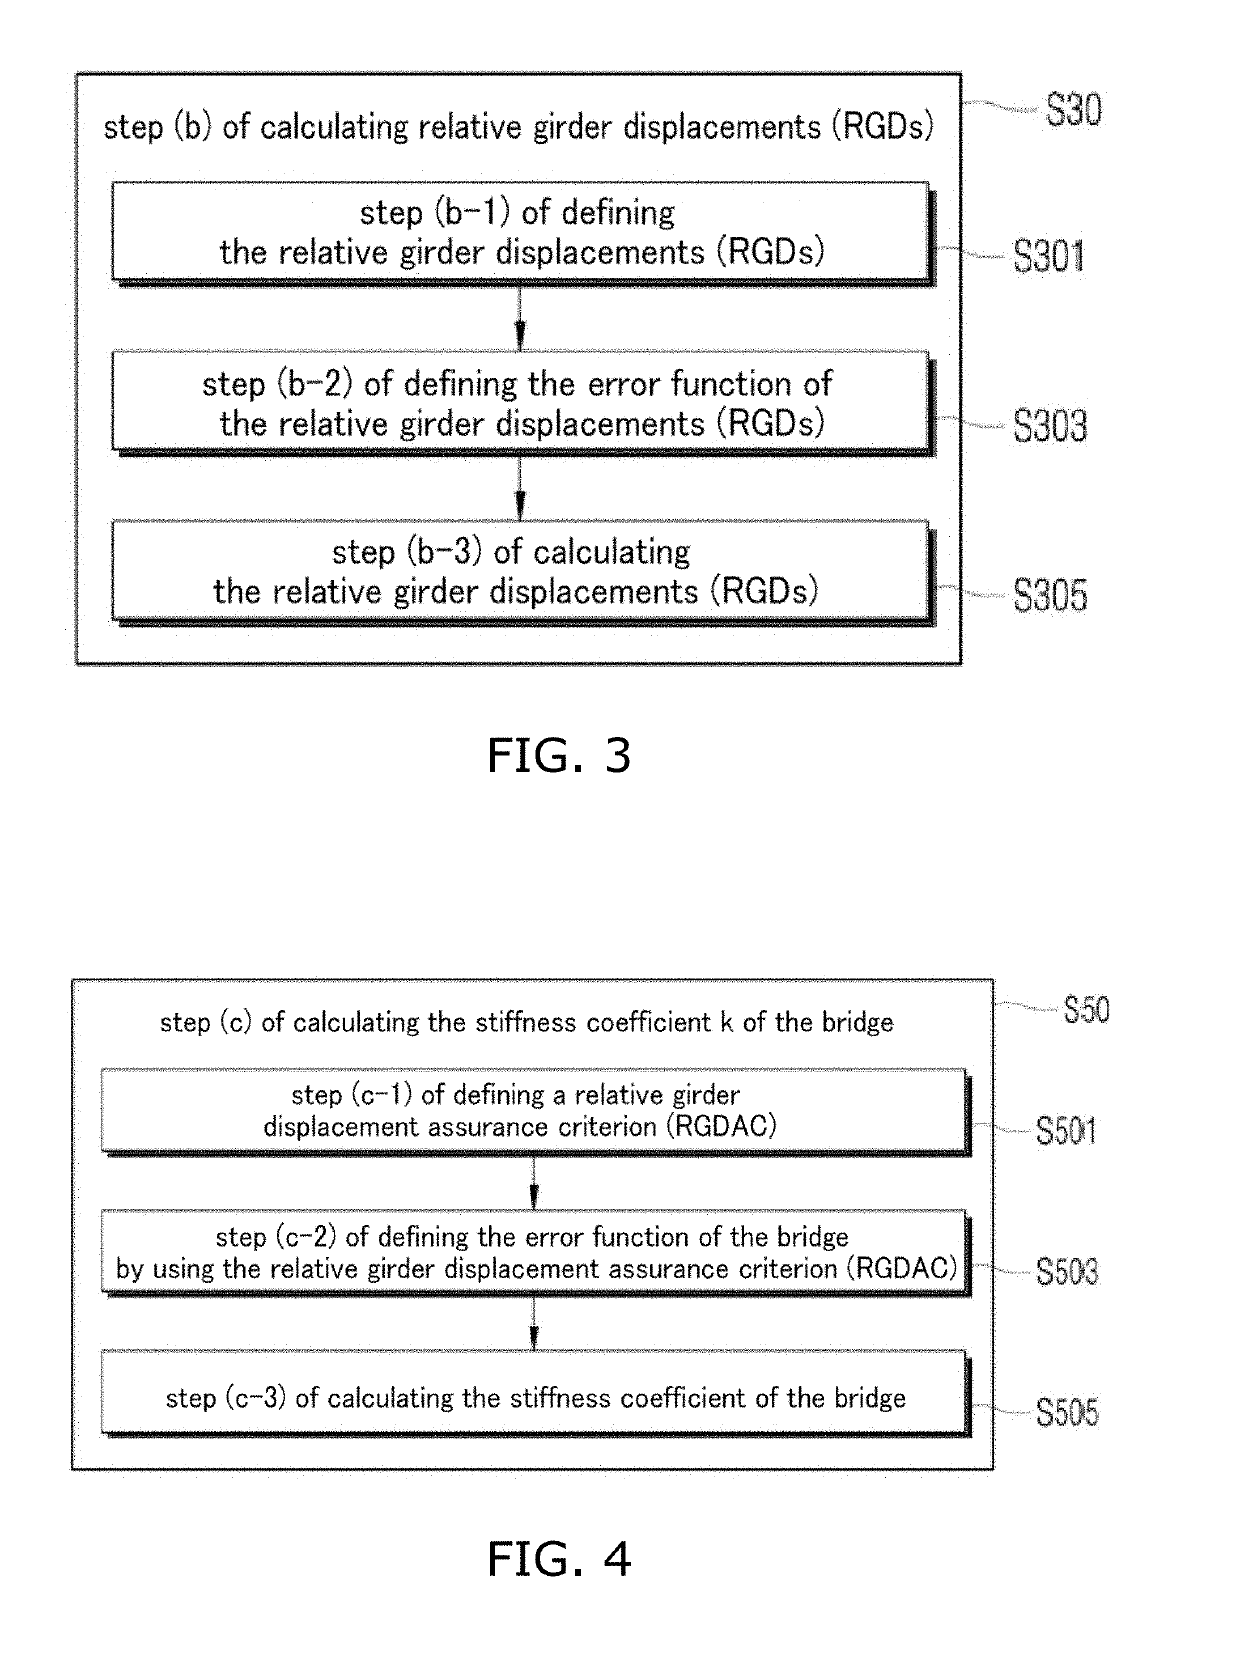 Method and program for calculating stiffness coefficient of bridge by using ambient vibration test data